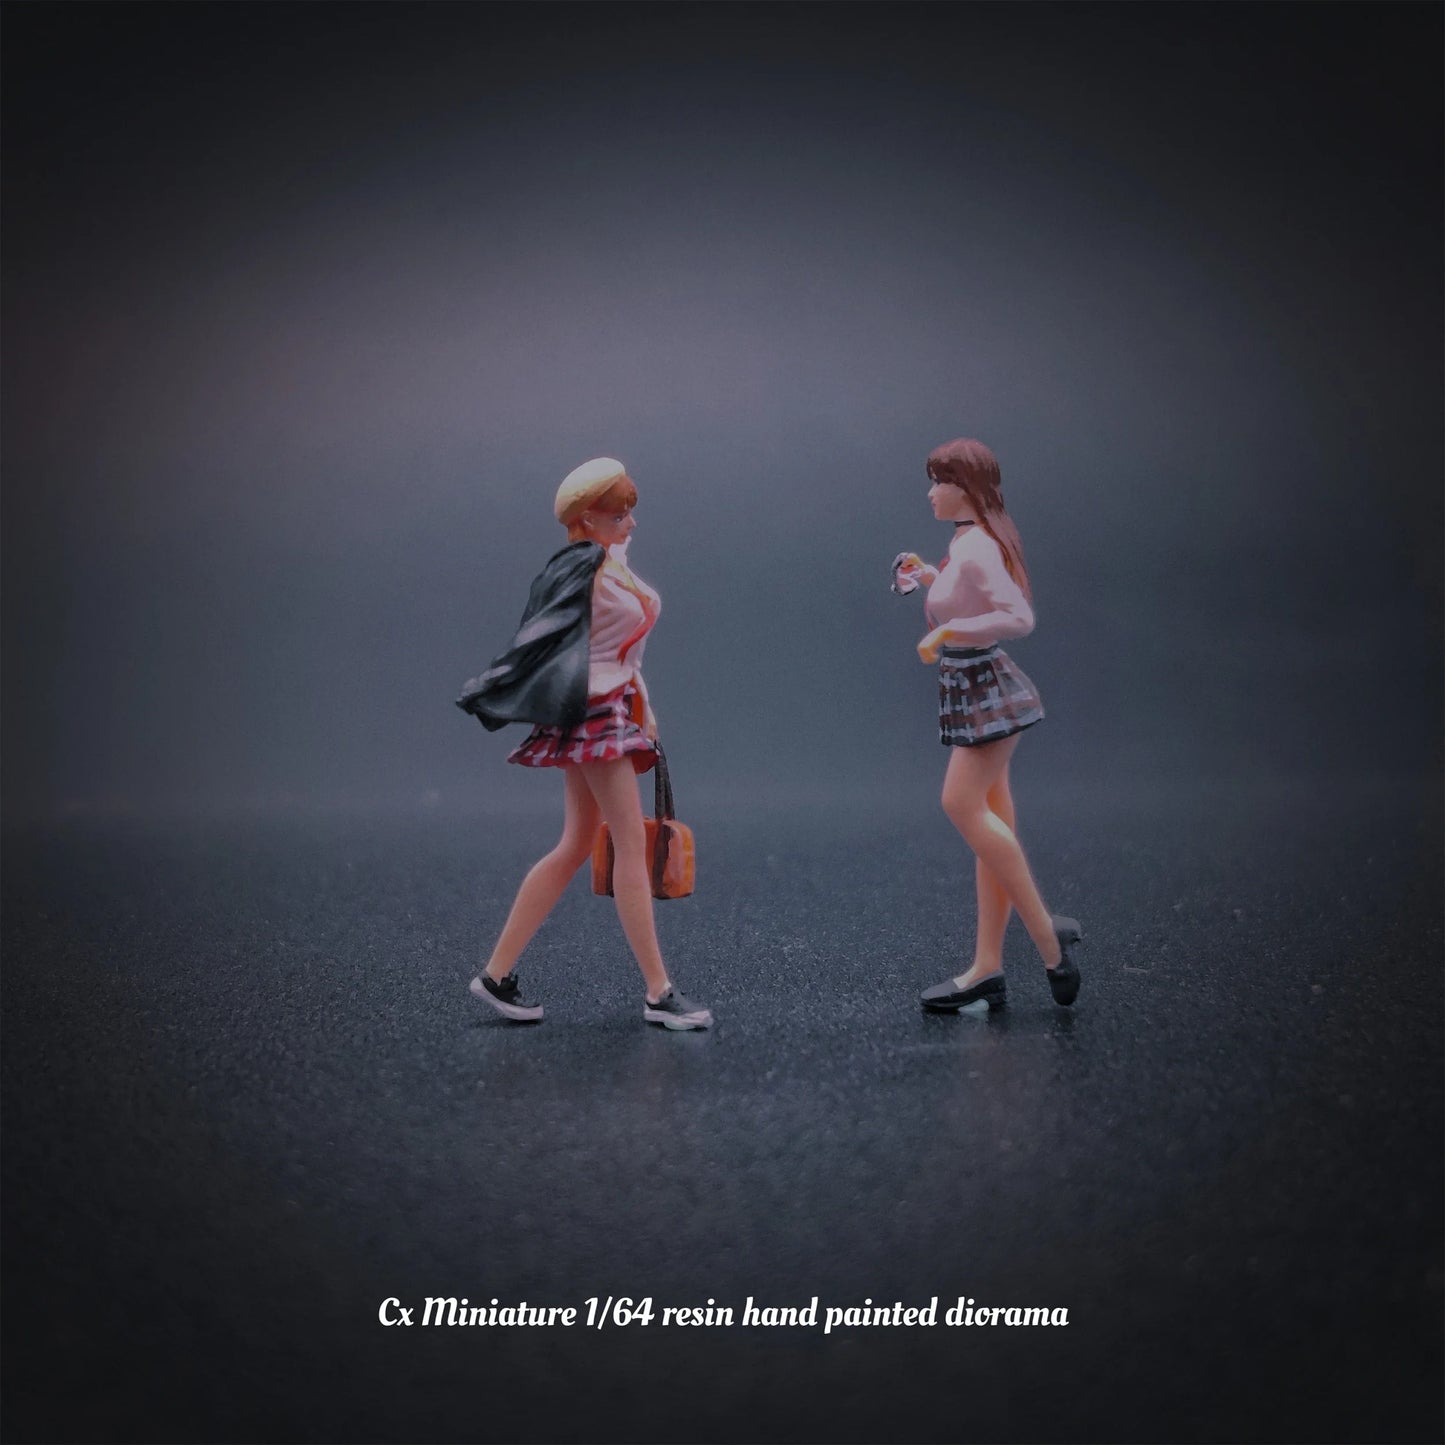 Cx Miniature Diorama 1/64 Scale Figurines Model Realistic Portrayal of JK Dress Duo Collection Miniature Hand-painted